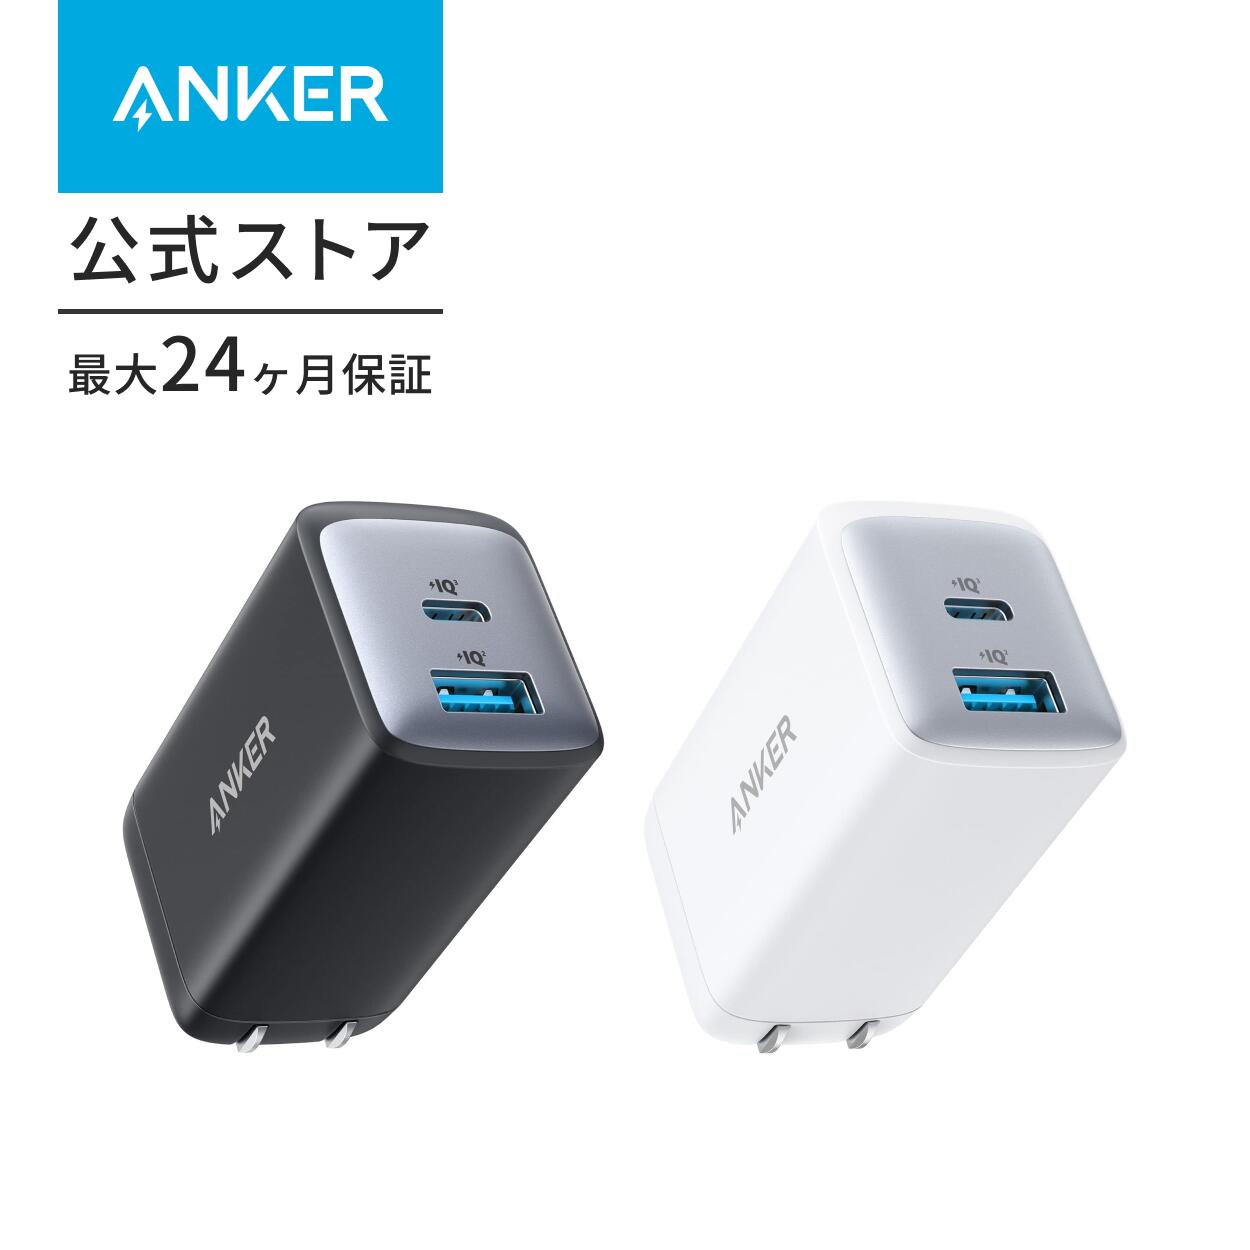 Anker 725 Charger (65W) (USB P